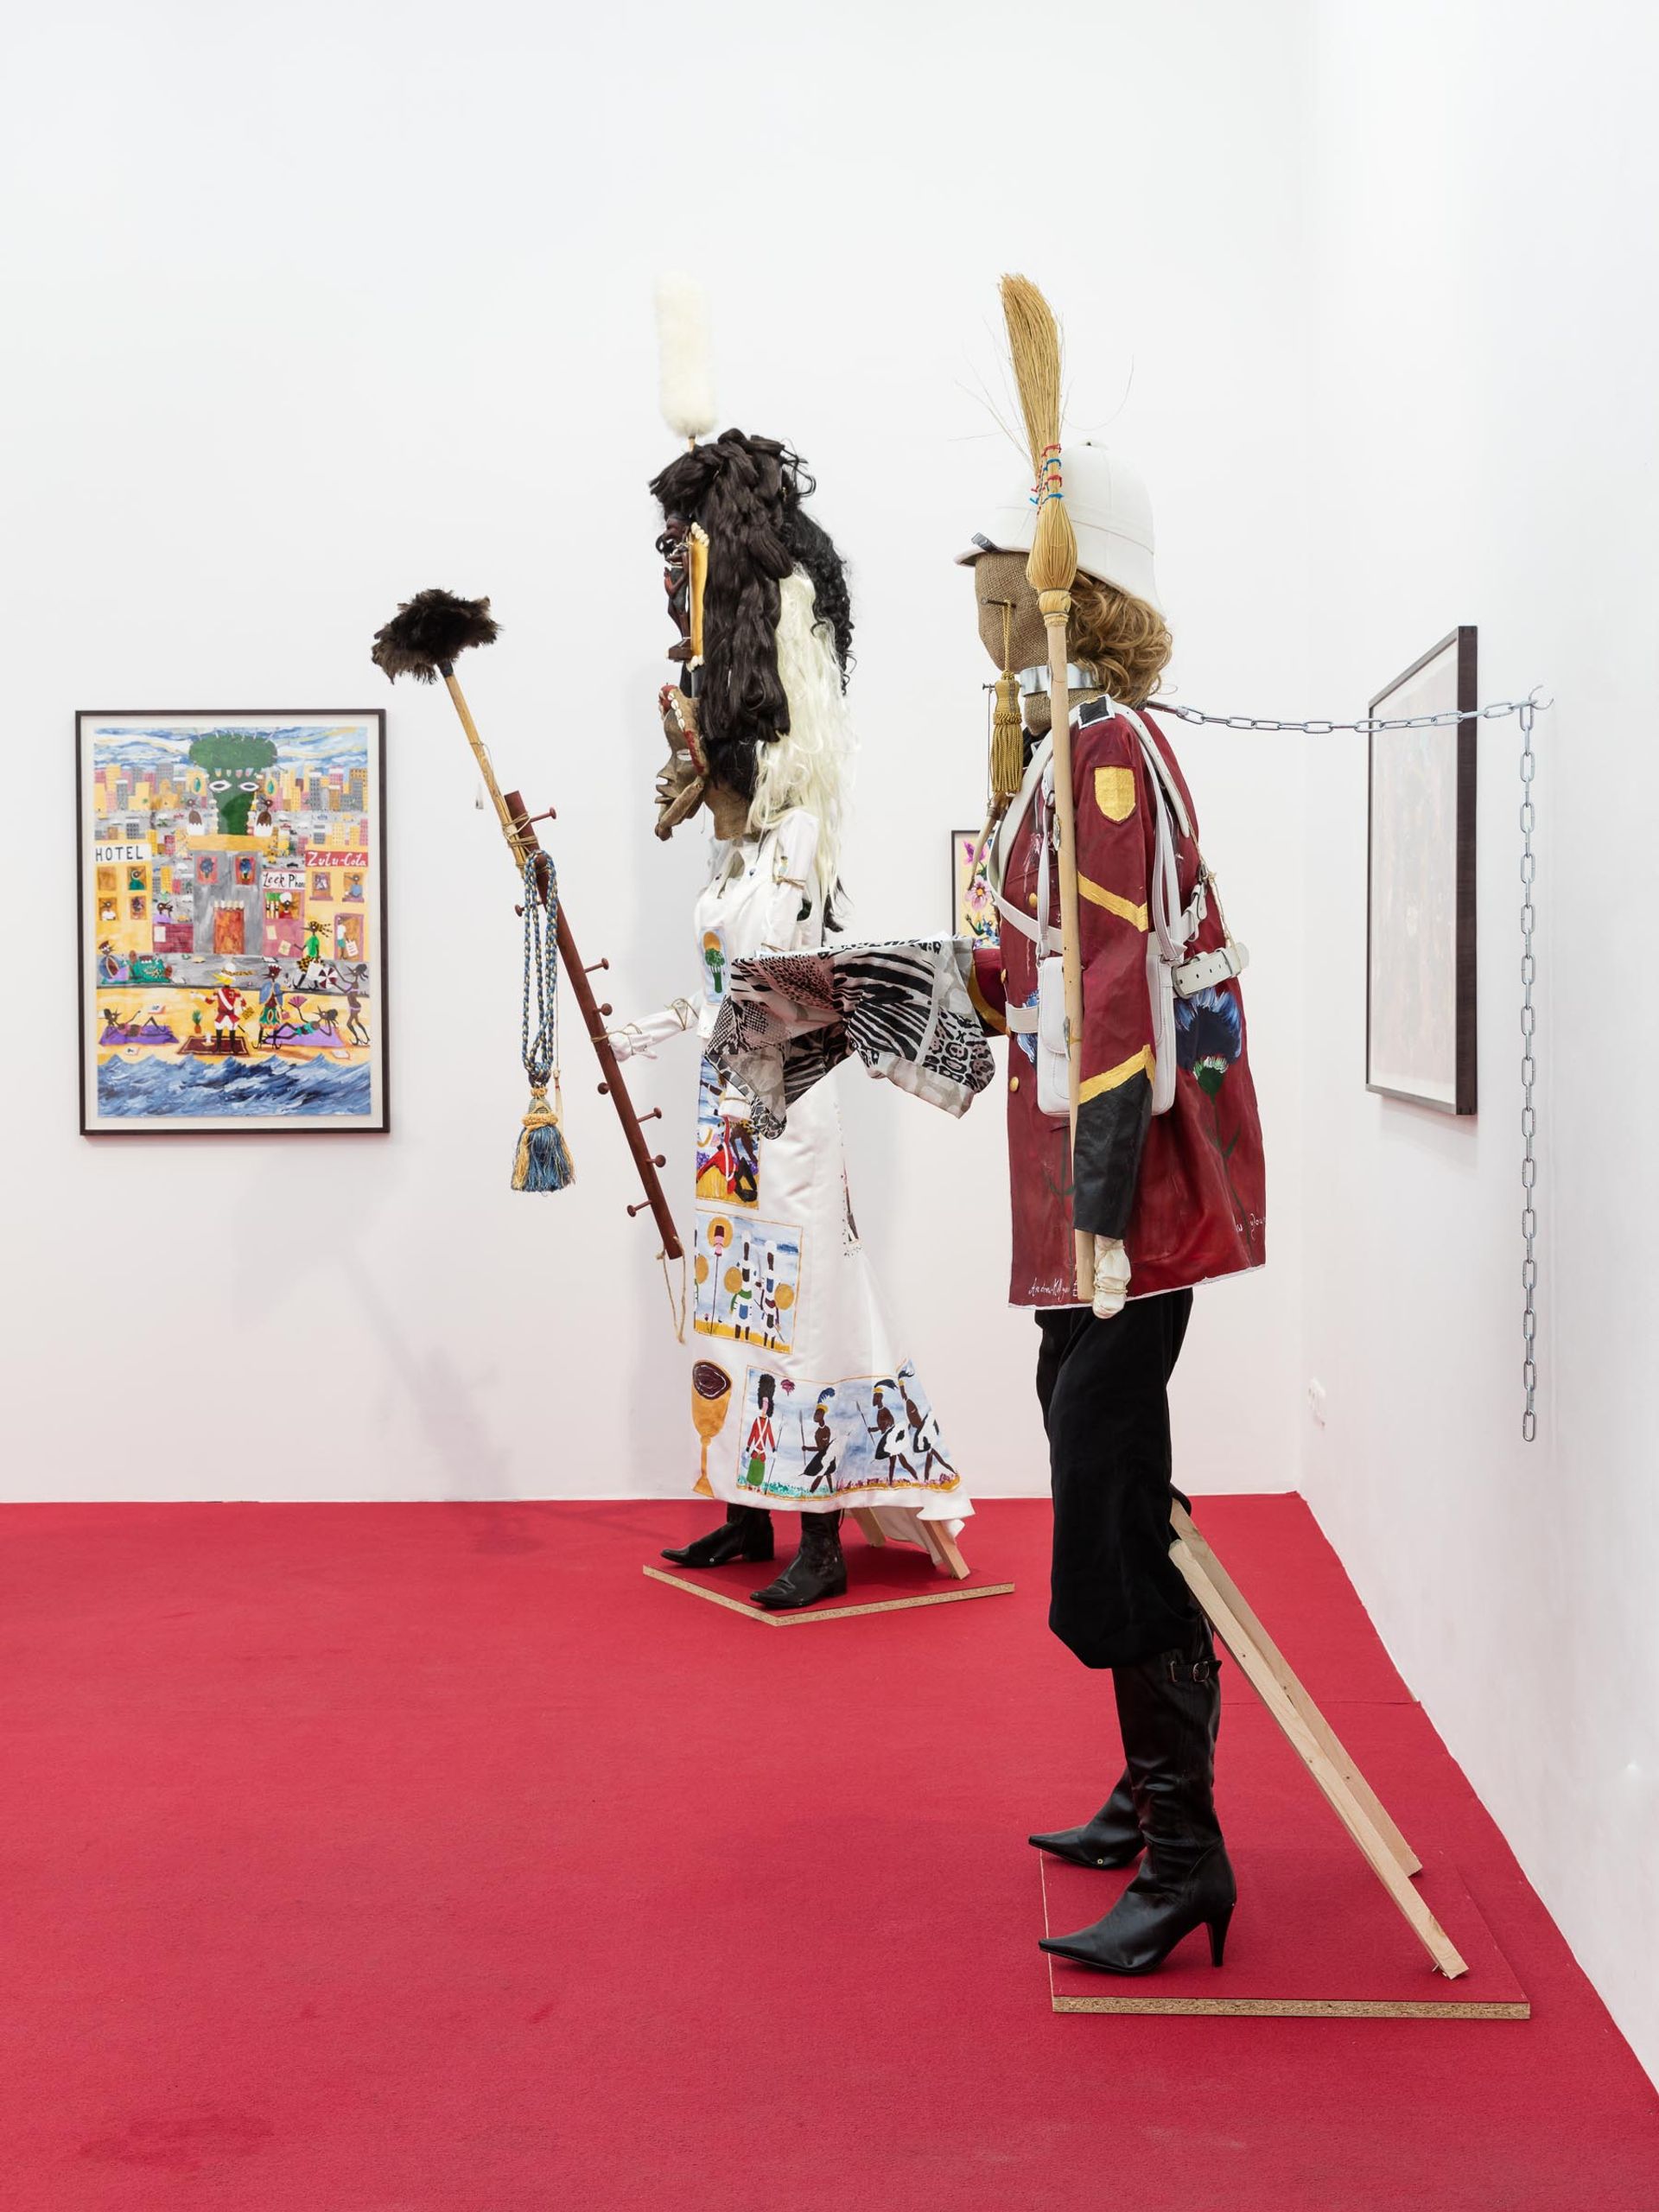 Installation view: Andrew Gilbert, “The Glorious Opening of Emperor Andrew's Museum”, 2018